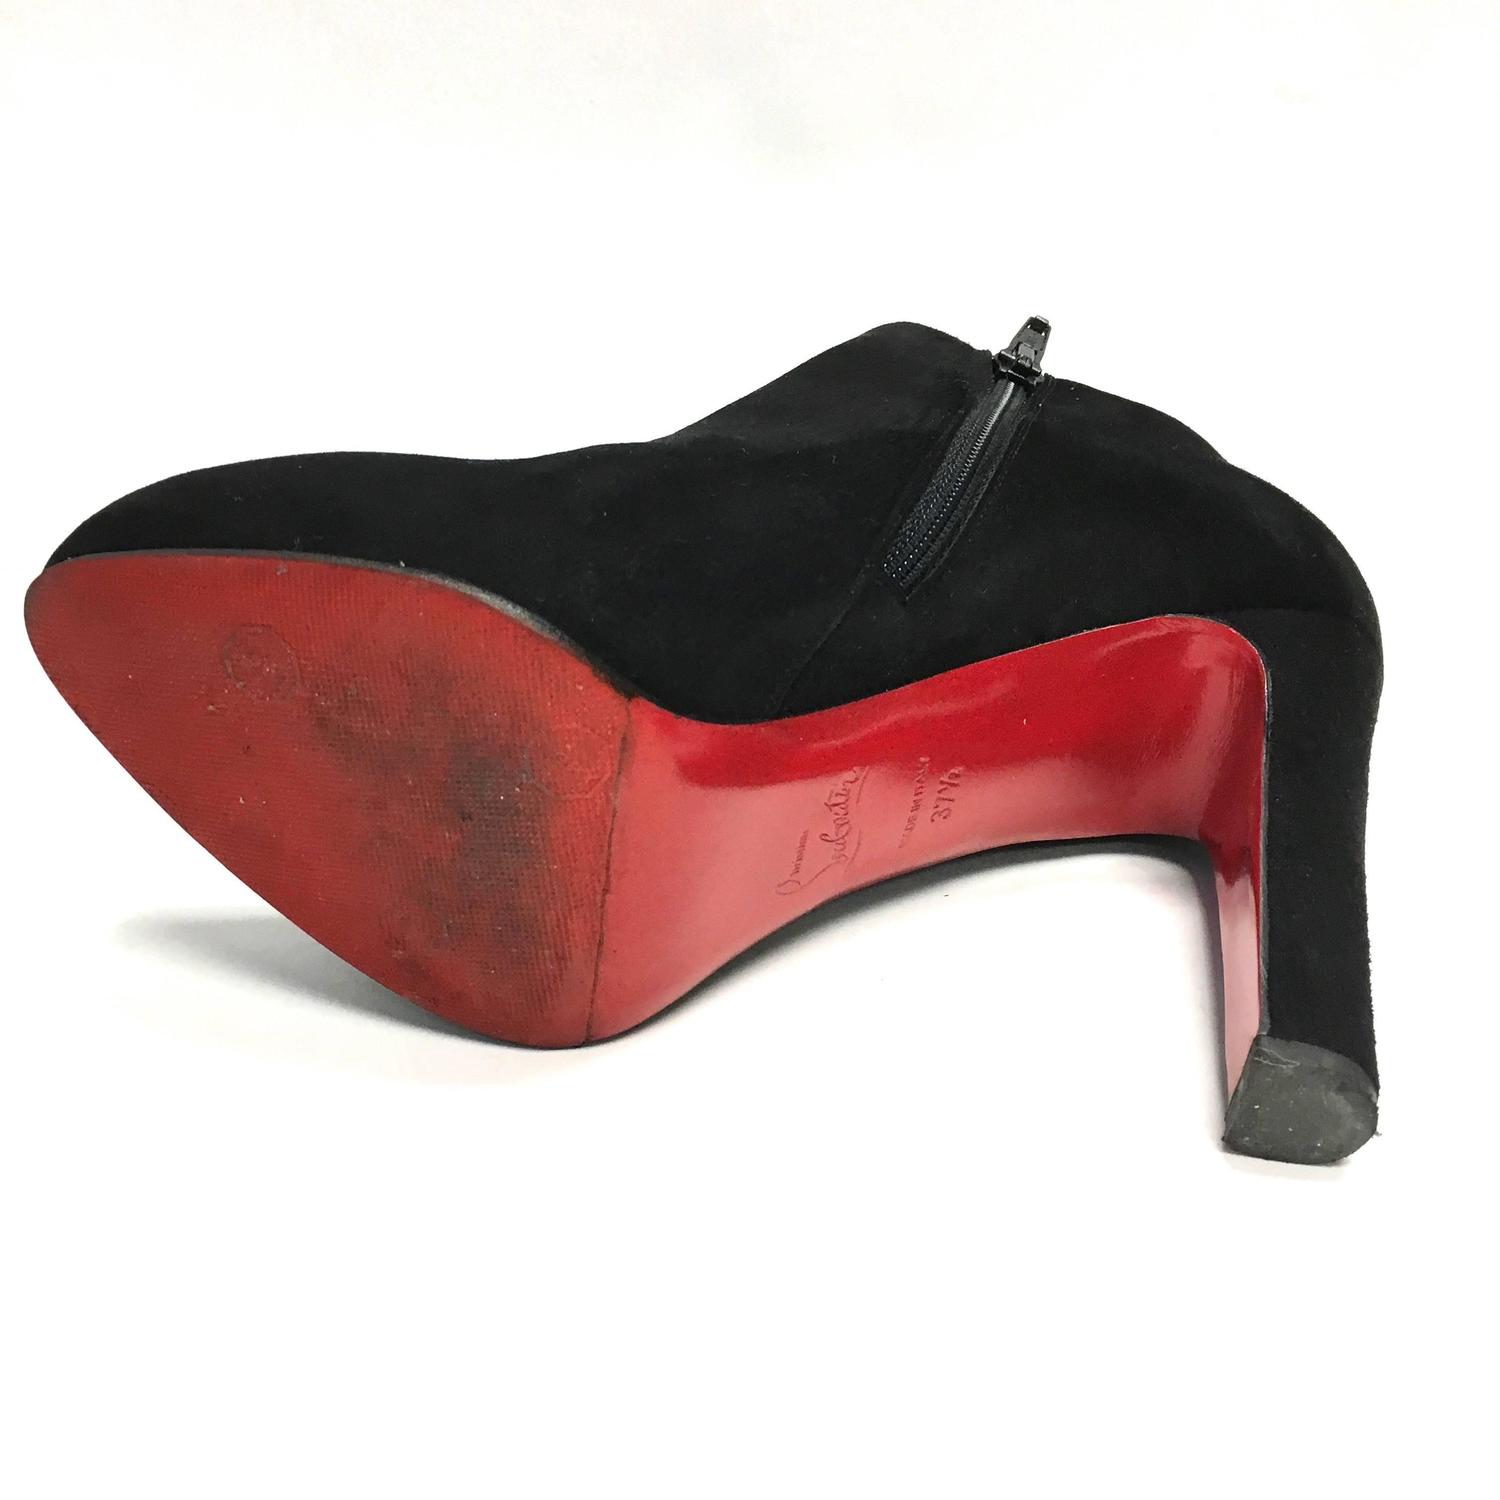 CHRISTIAN LOUBOUTIN Vicky Booty 120 Black Suede Red Bottom 